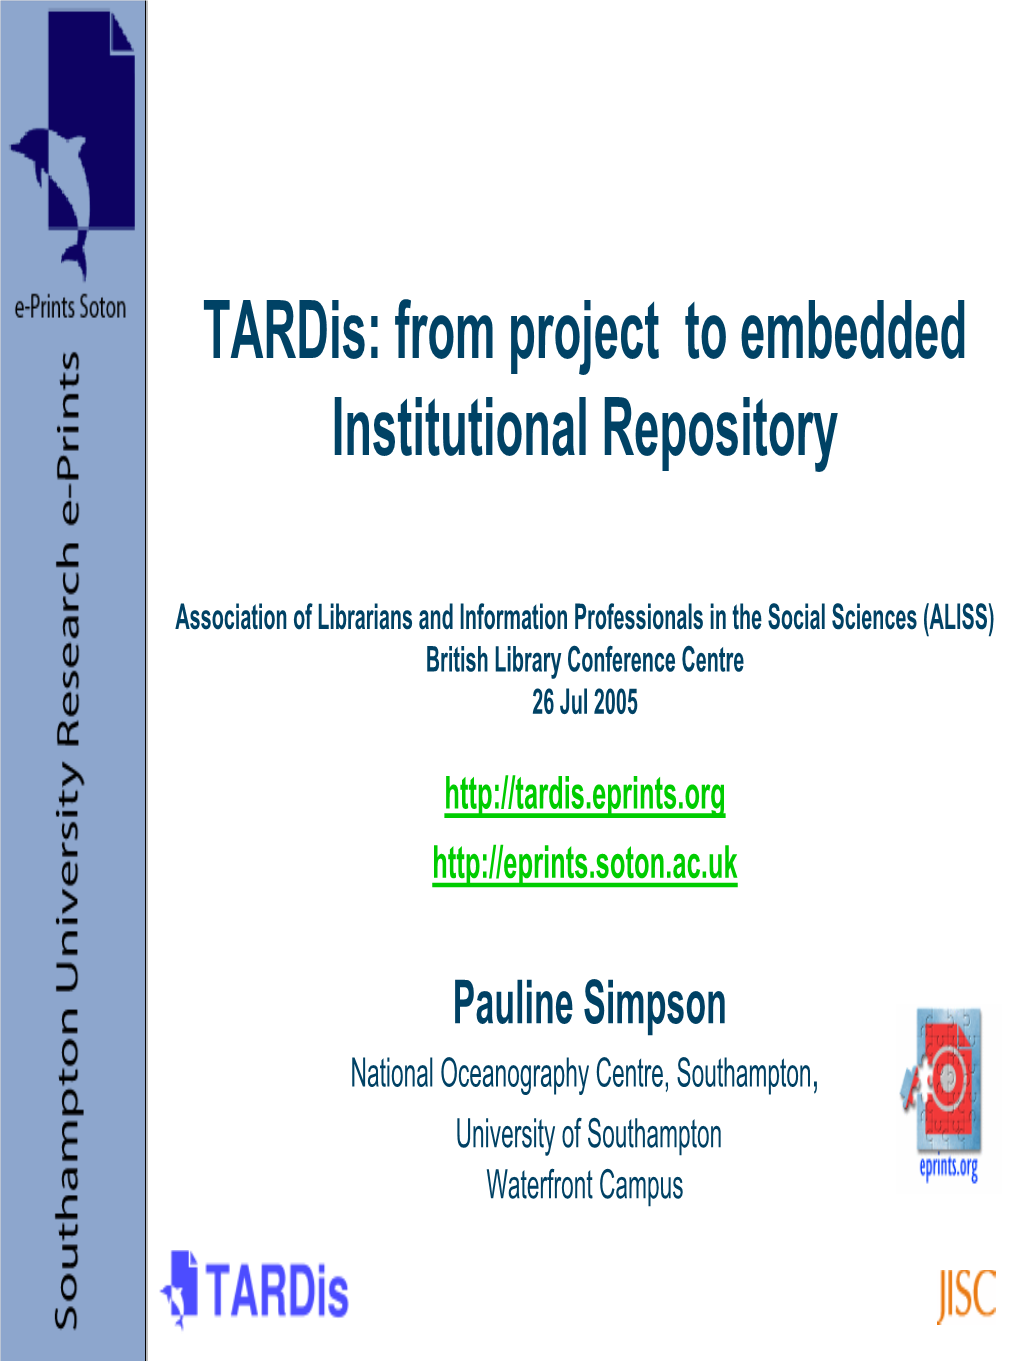 Farewell to the Tardis: Embedding the Institutional Repository Project in the Institution